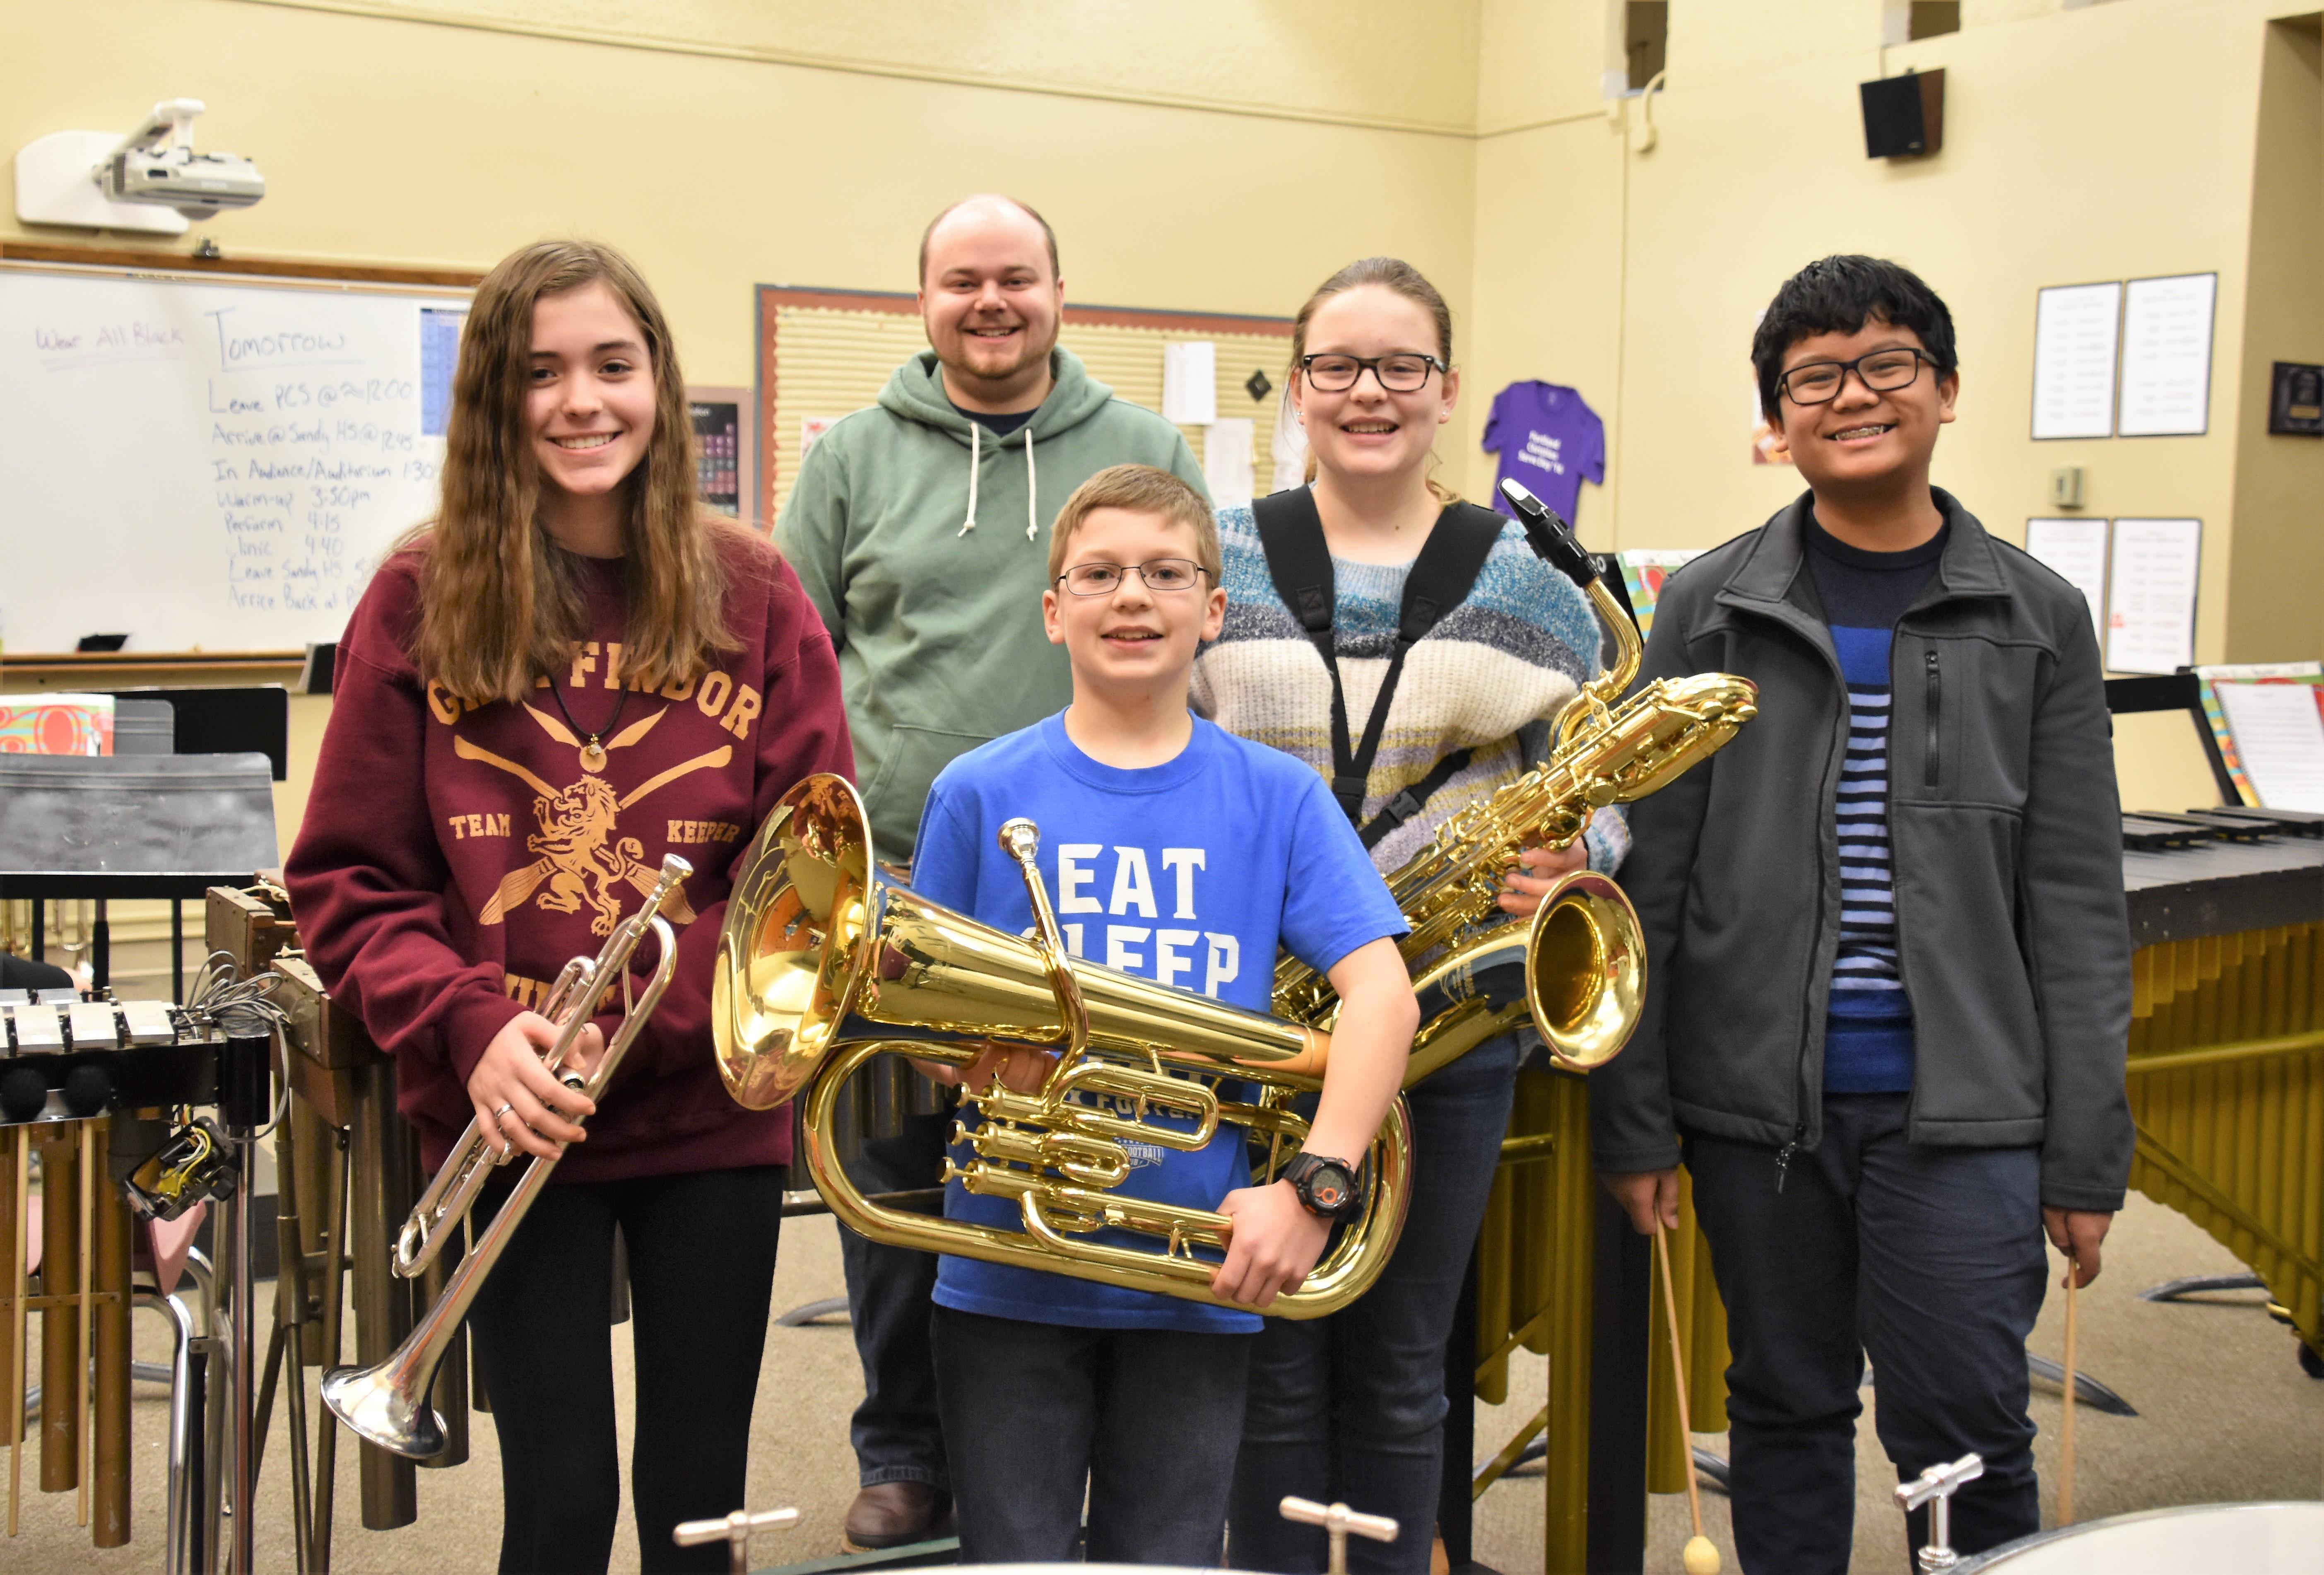 Four student musicians who won this honor